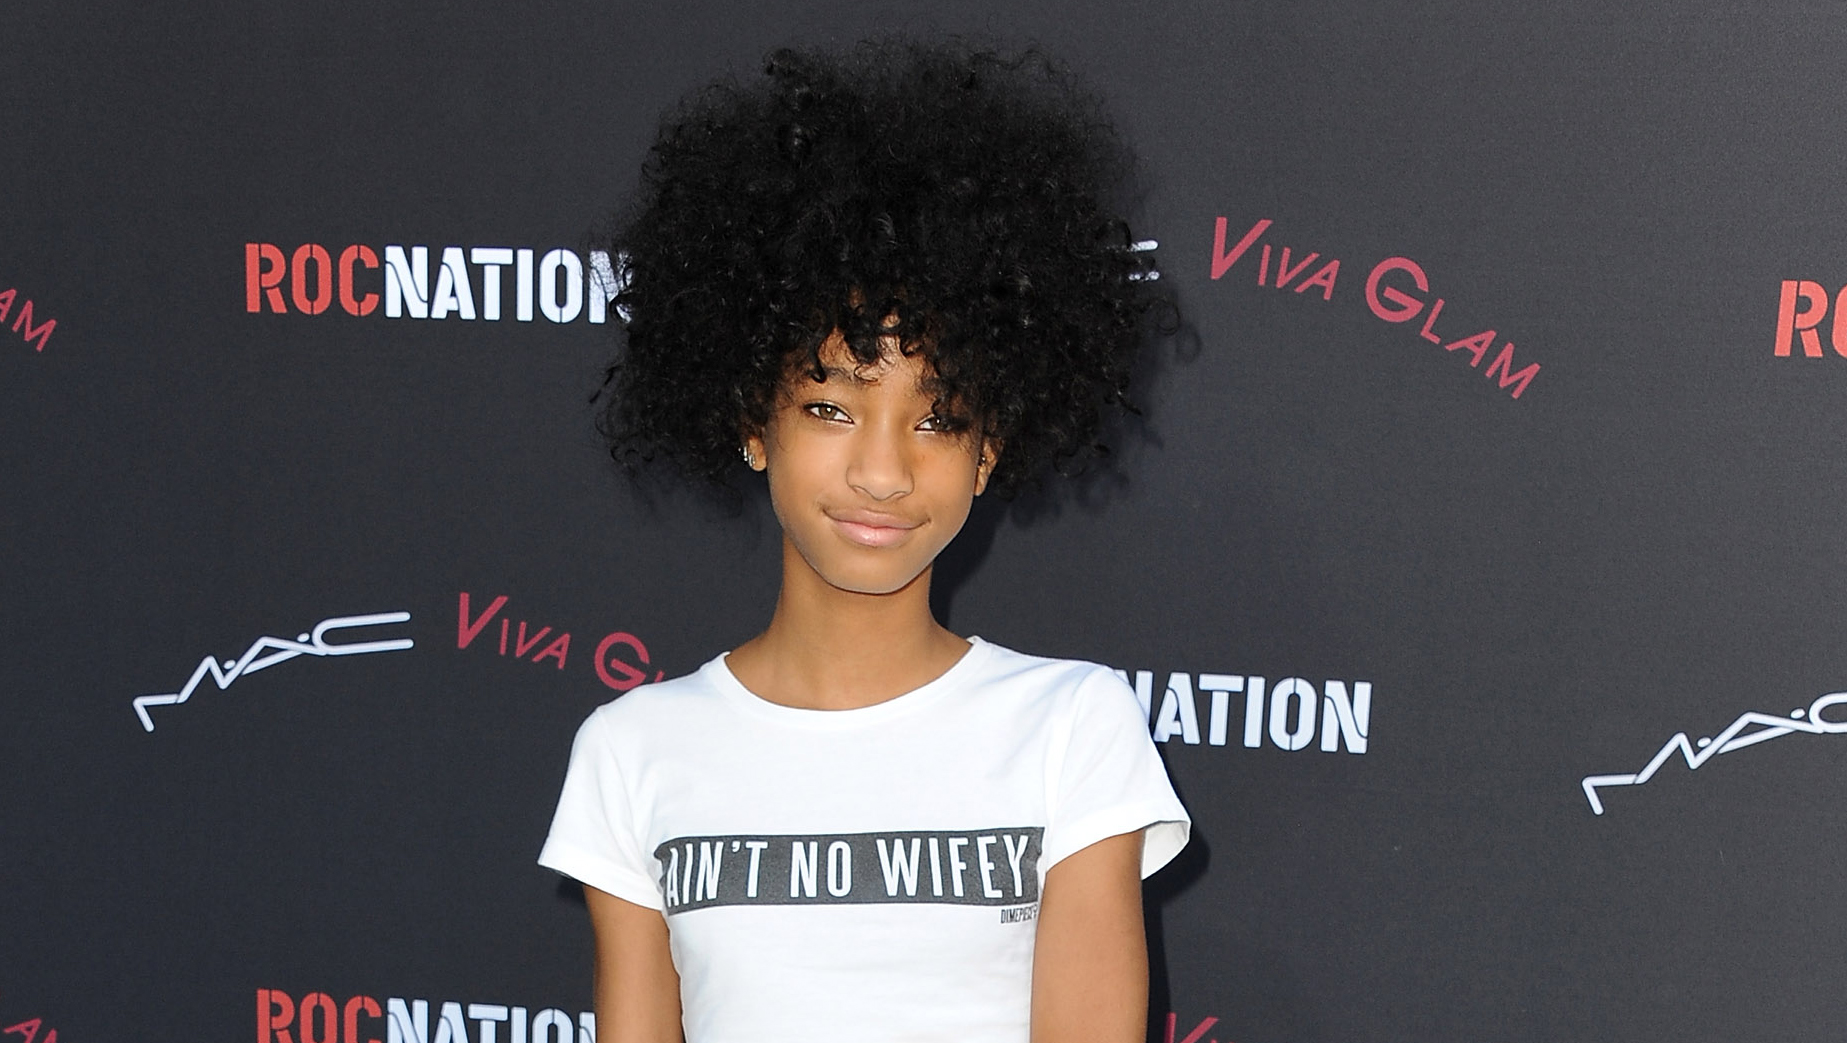 Willow Smith in bed with Moises Arias, fans outraged - CBS News